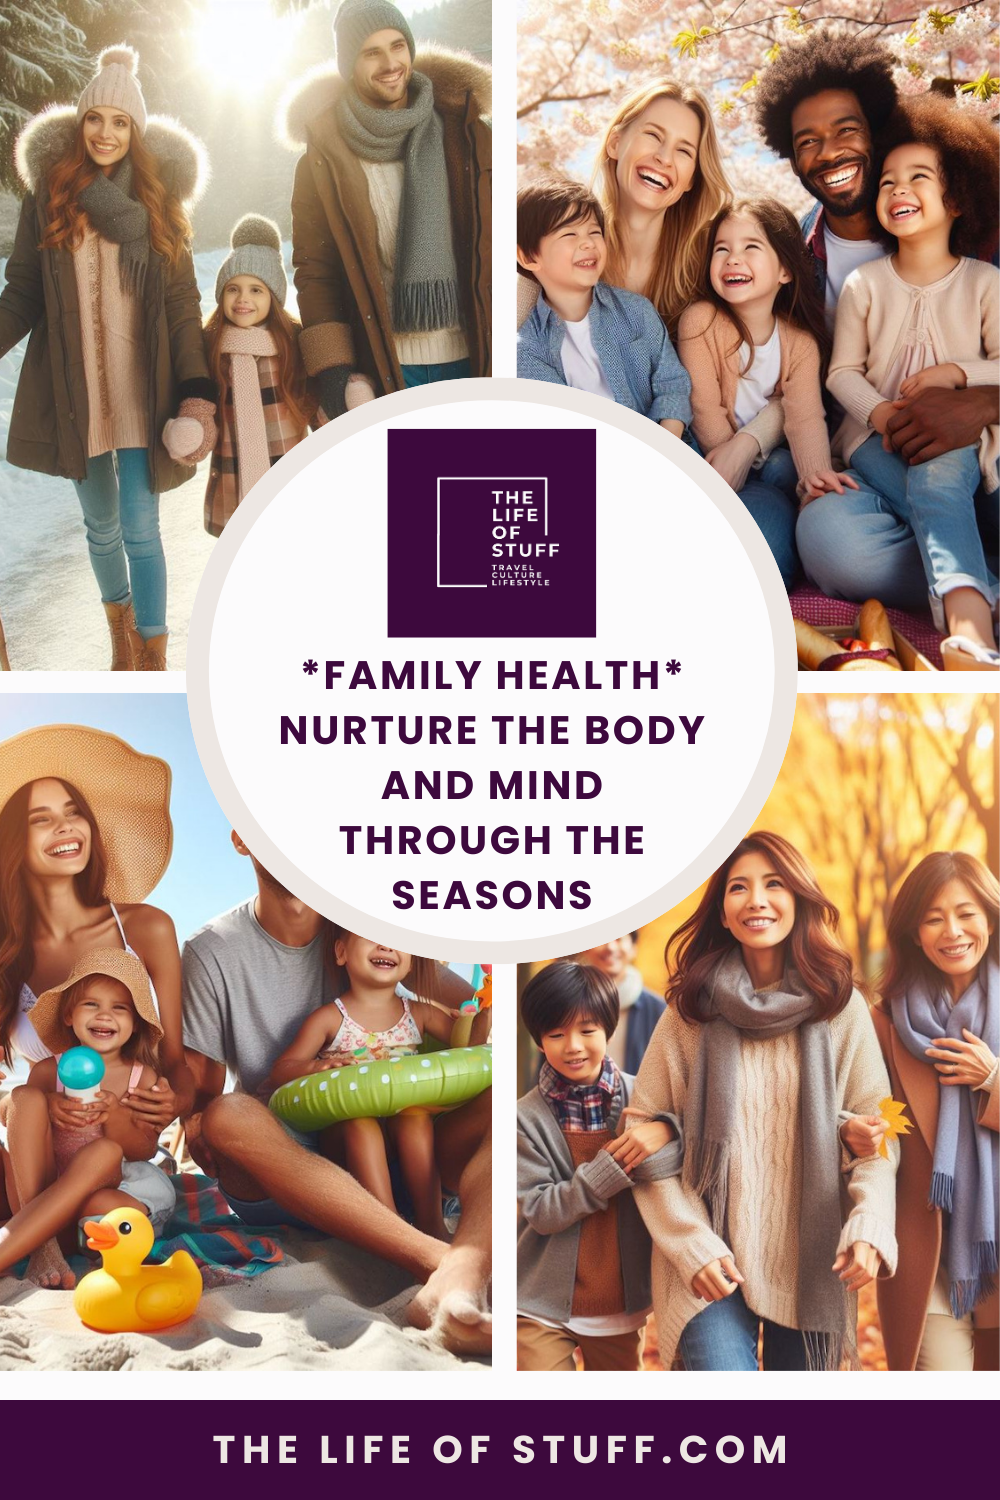 Family Health - Nurture The Body and Mind Through The Seasons - The Life of Stuff